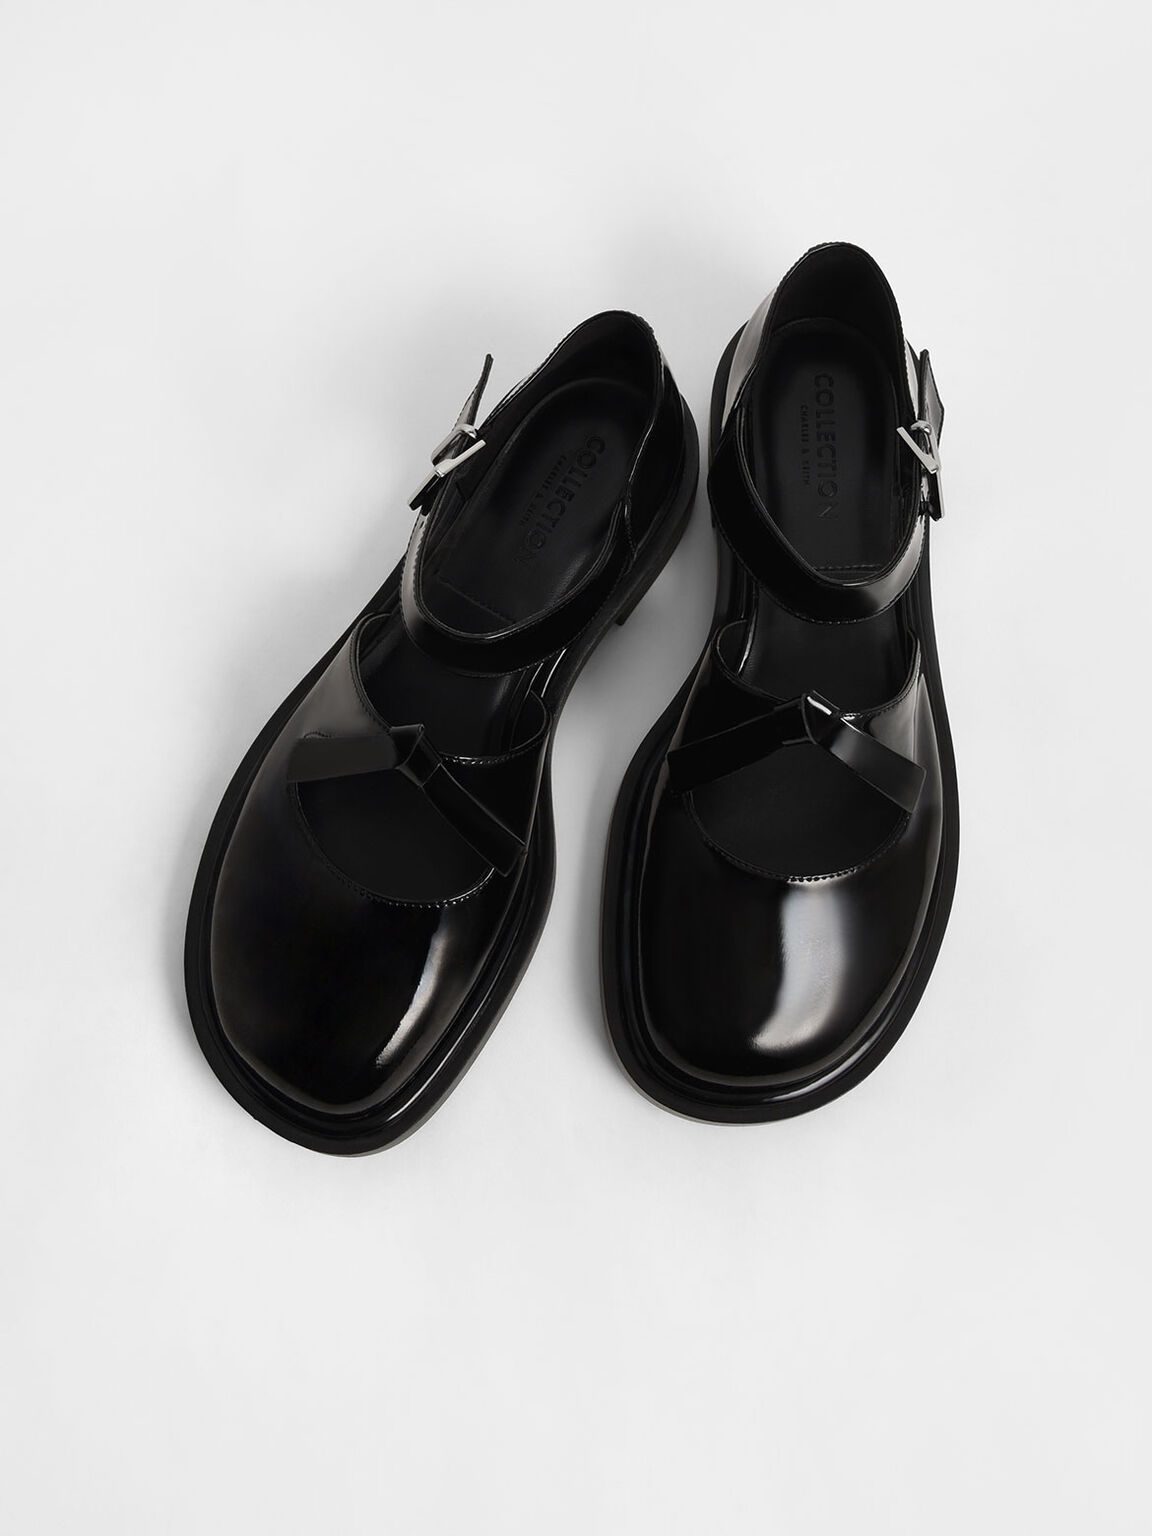 Rumi Patent Leather Bow-Tie Mary Jane Flats, Black, hi-res